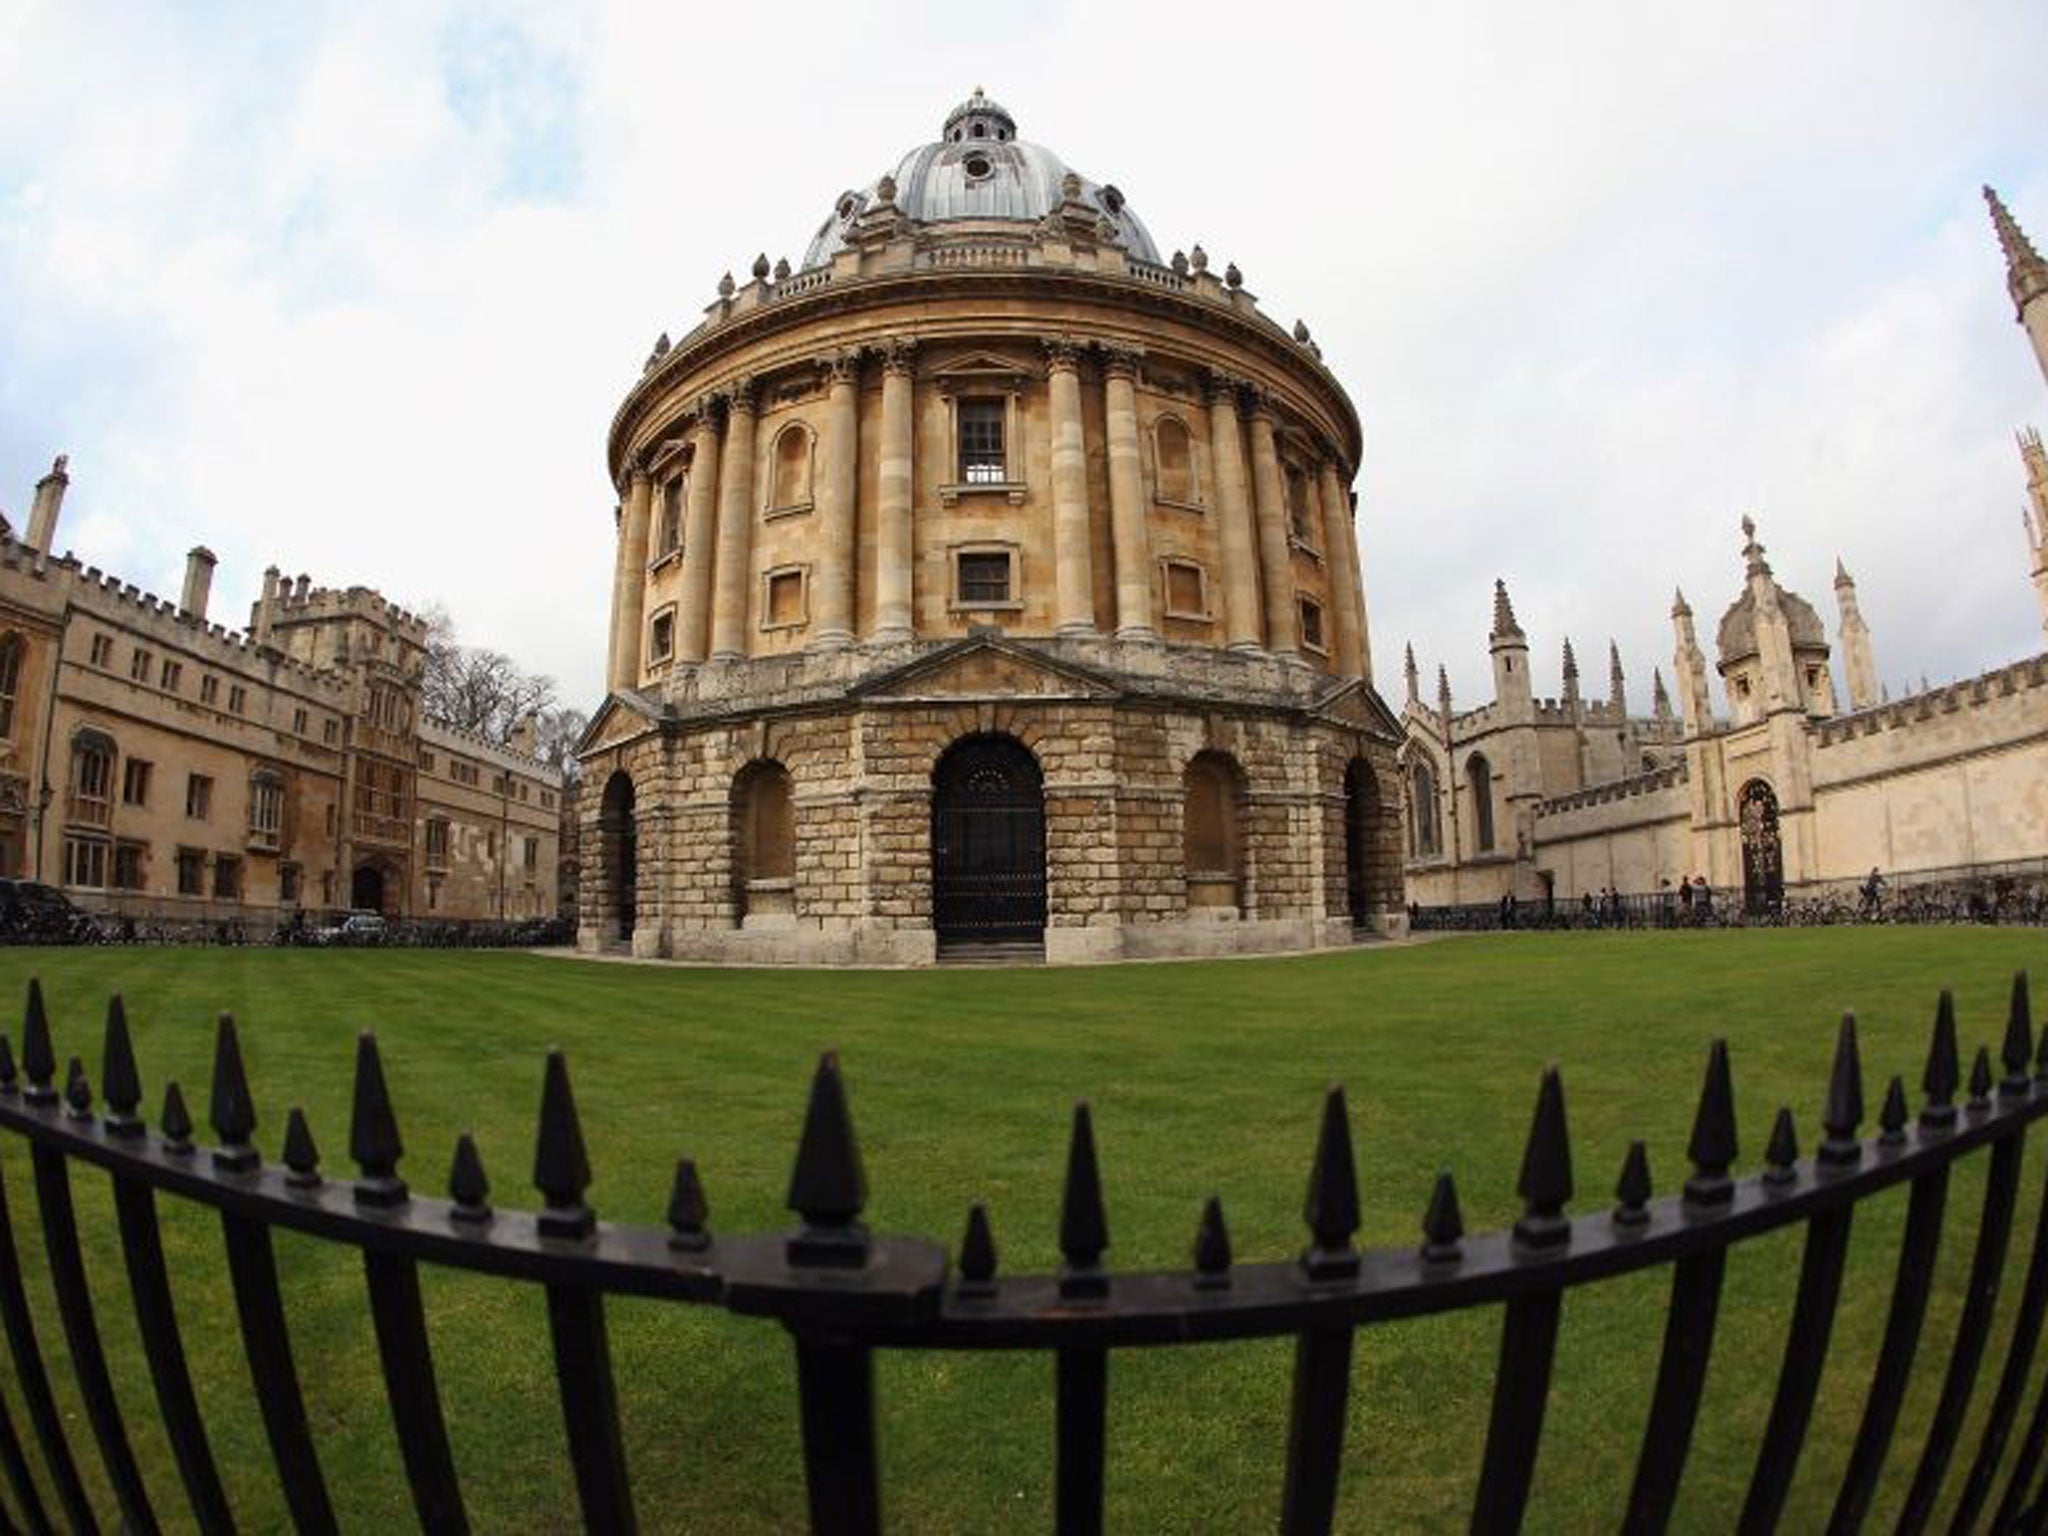 Books tour: the Bodleian Library in Oxford is among the attractions on Heritage Open Days